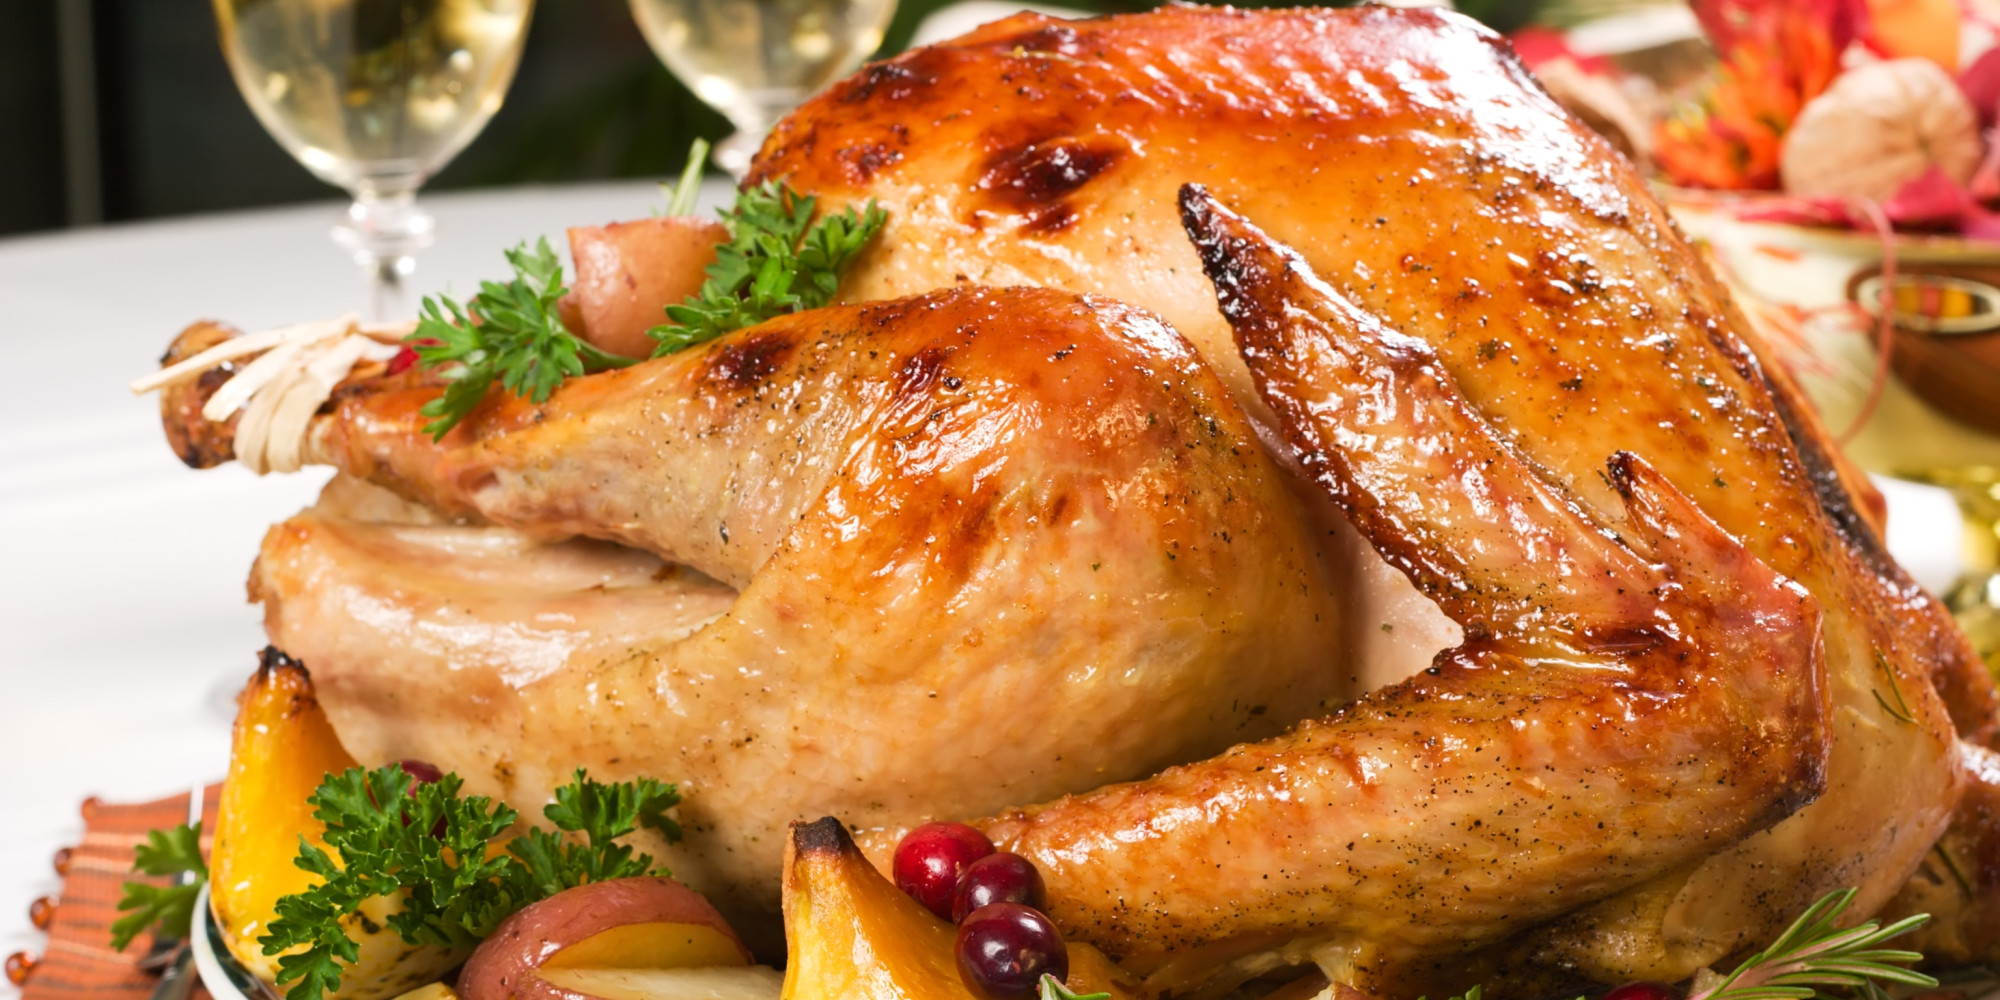 48,835 Reasons to Enjoy Lots of Food This Thanksgiving | HuffPost